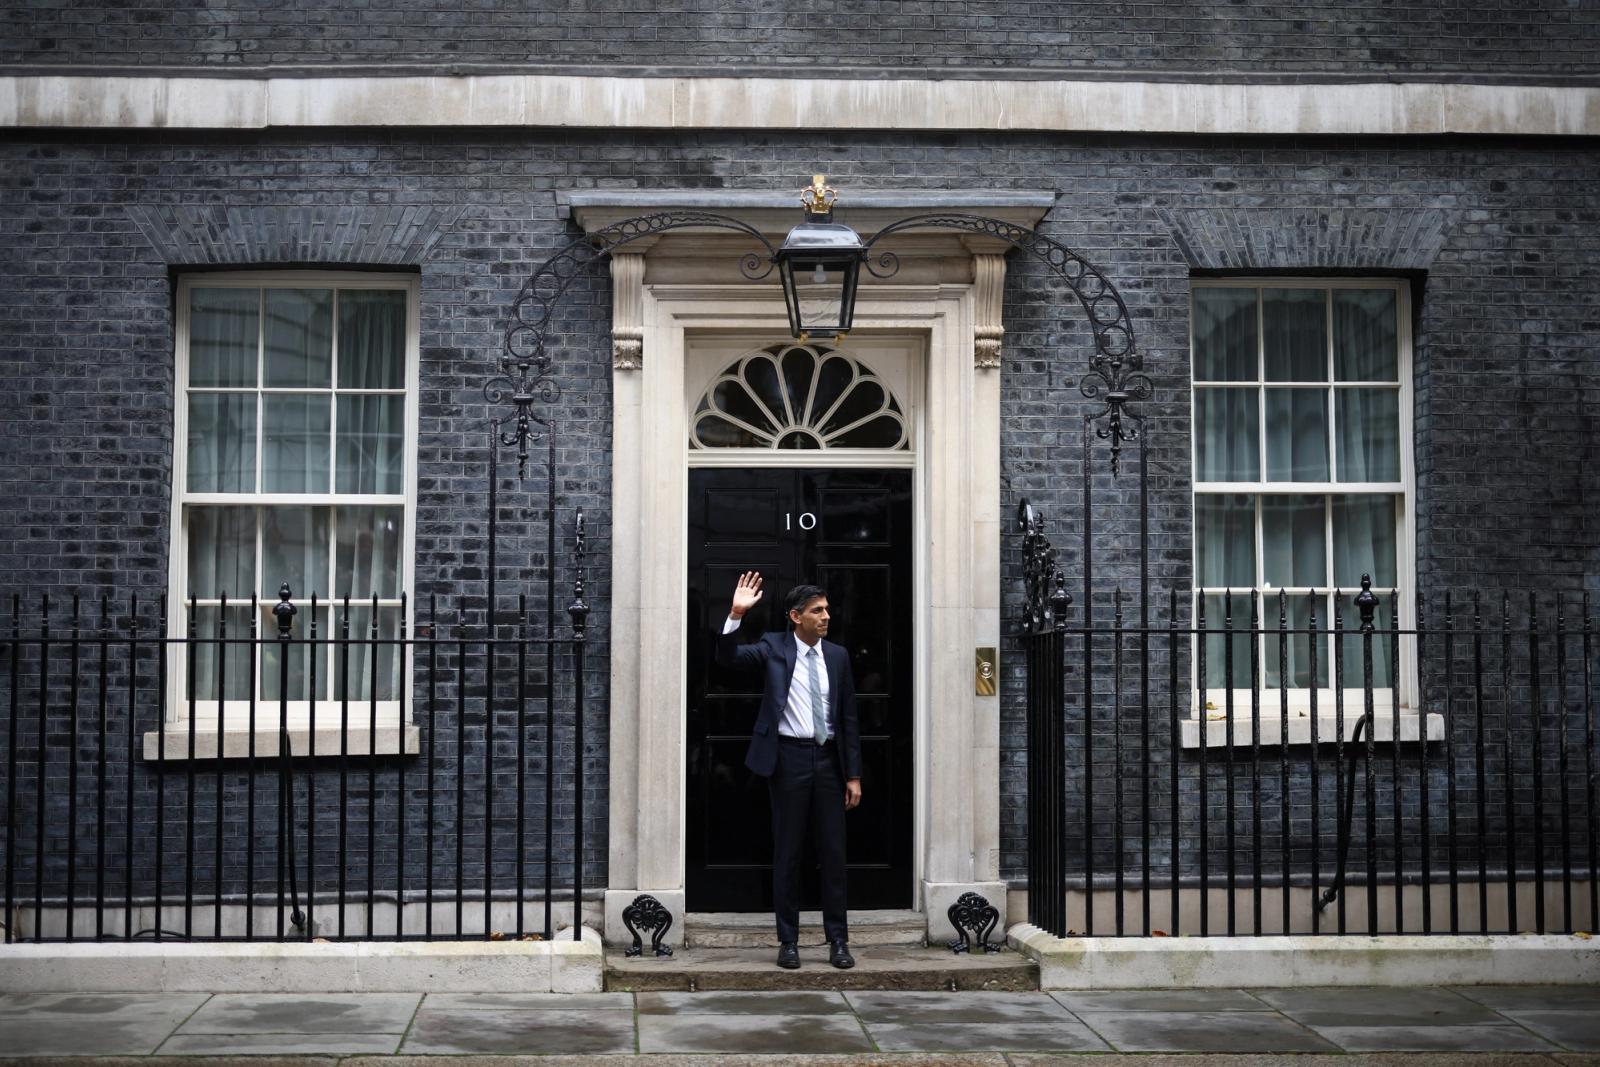 Britain's new Prime Minister Rishi Sunak waves as he enters Number 10 Downing Street, in London, Britain, October 25, 2022.